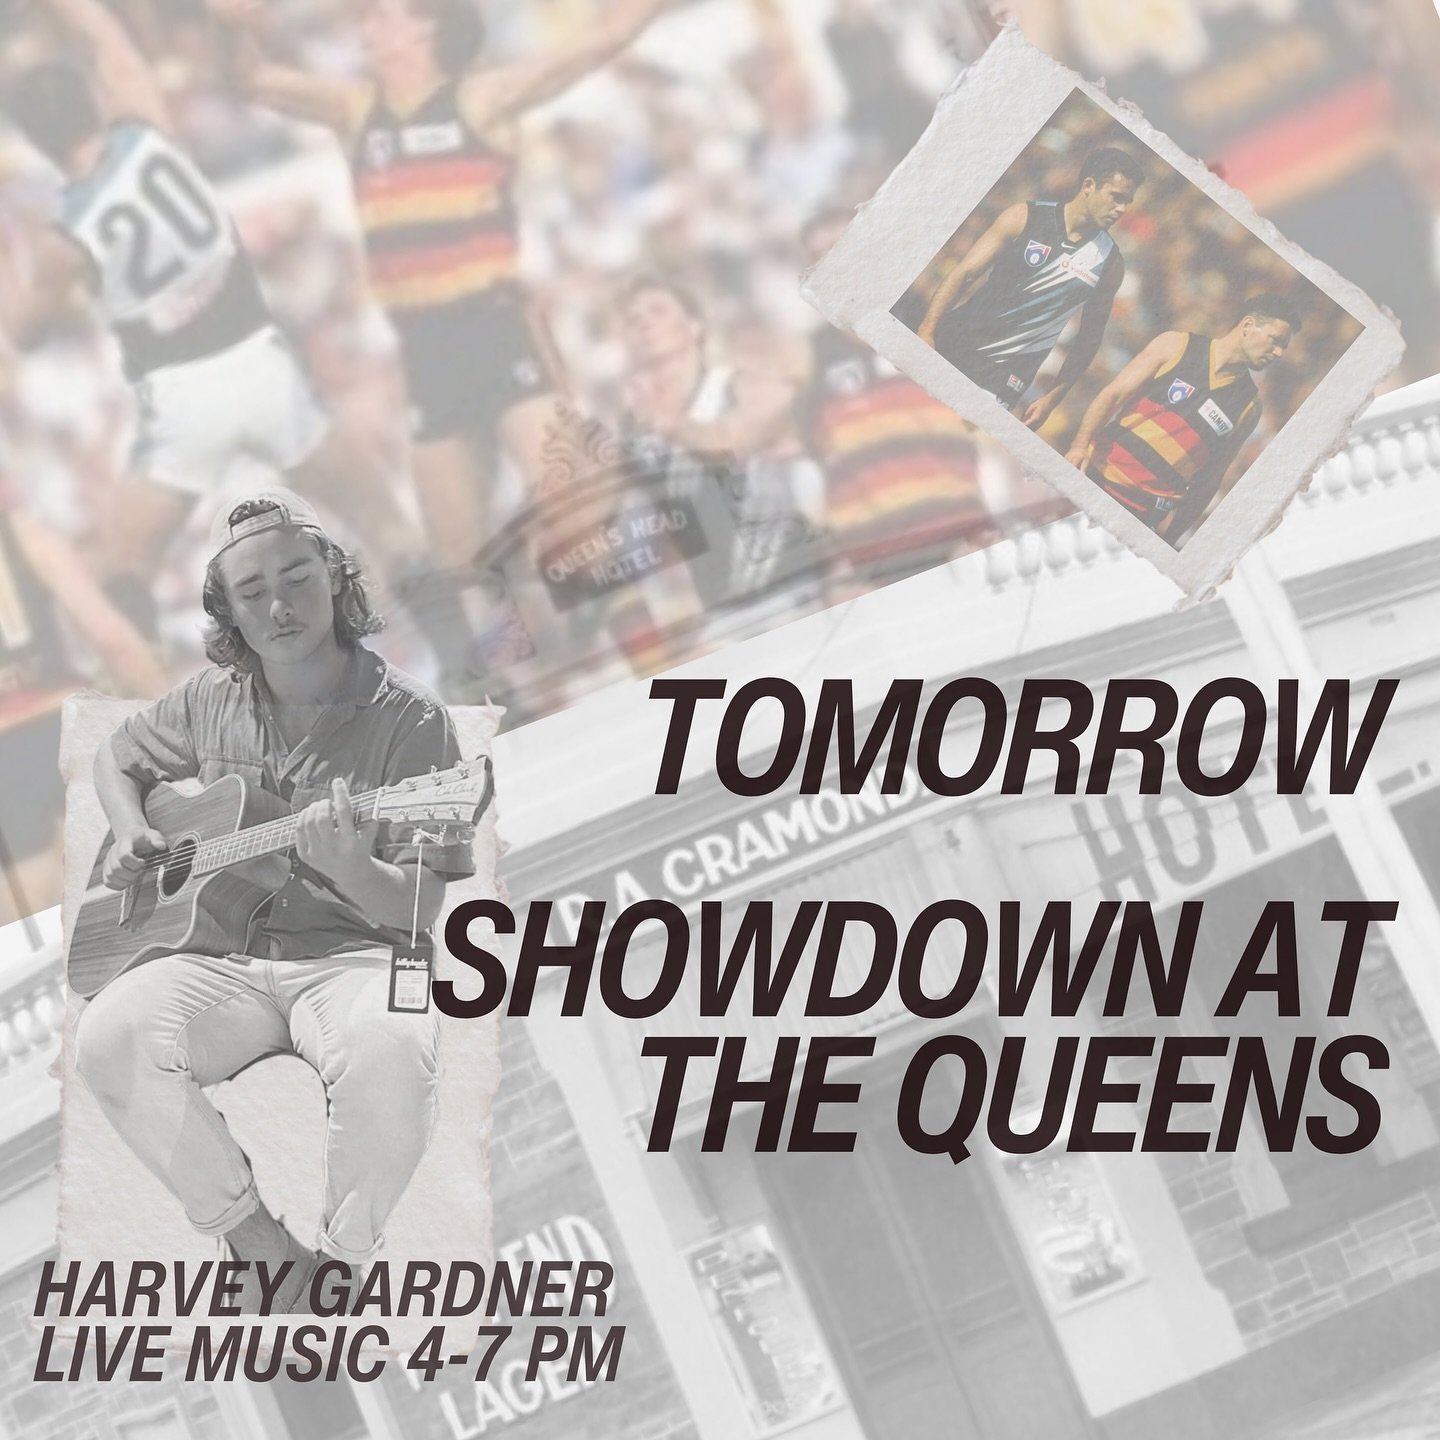 Tomorrow at The Queen&rsquo;s, it&rsquo;s the Showdown!
Live Music from Harvey Gardner from 4-7 PM!
See you at The Queen&rsquo;s